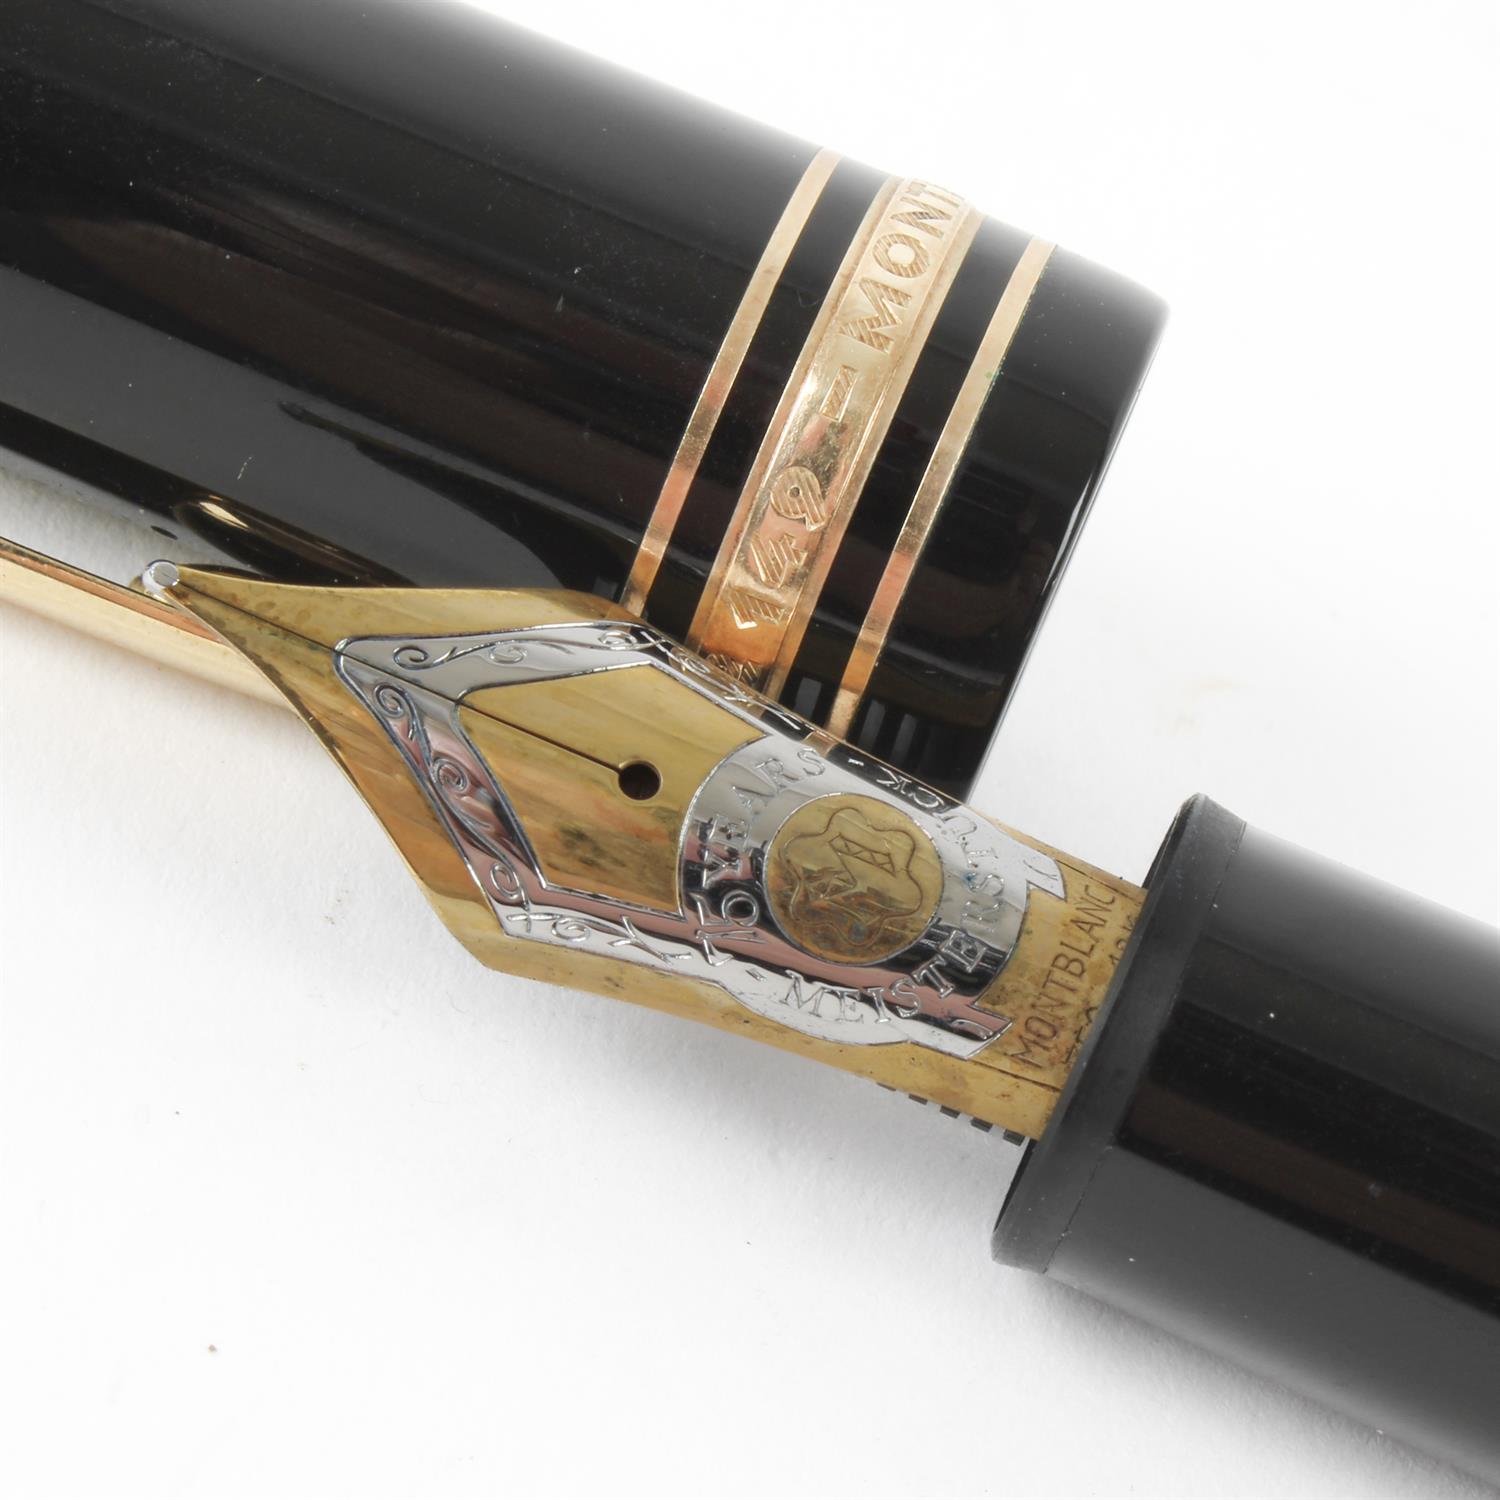 Montblanc Meisterstuck fountain pen - Image 2 of 3